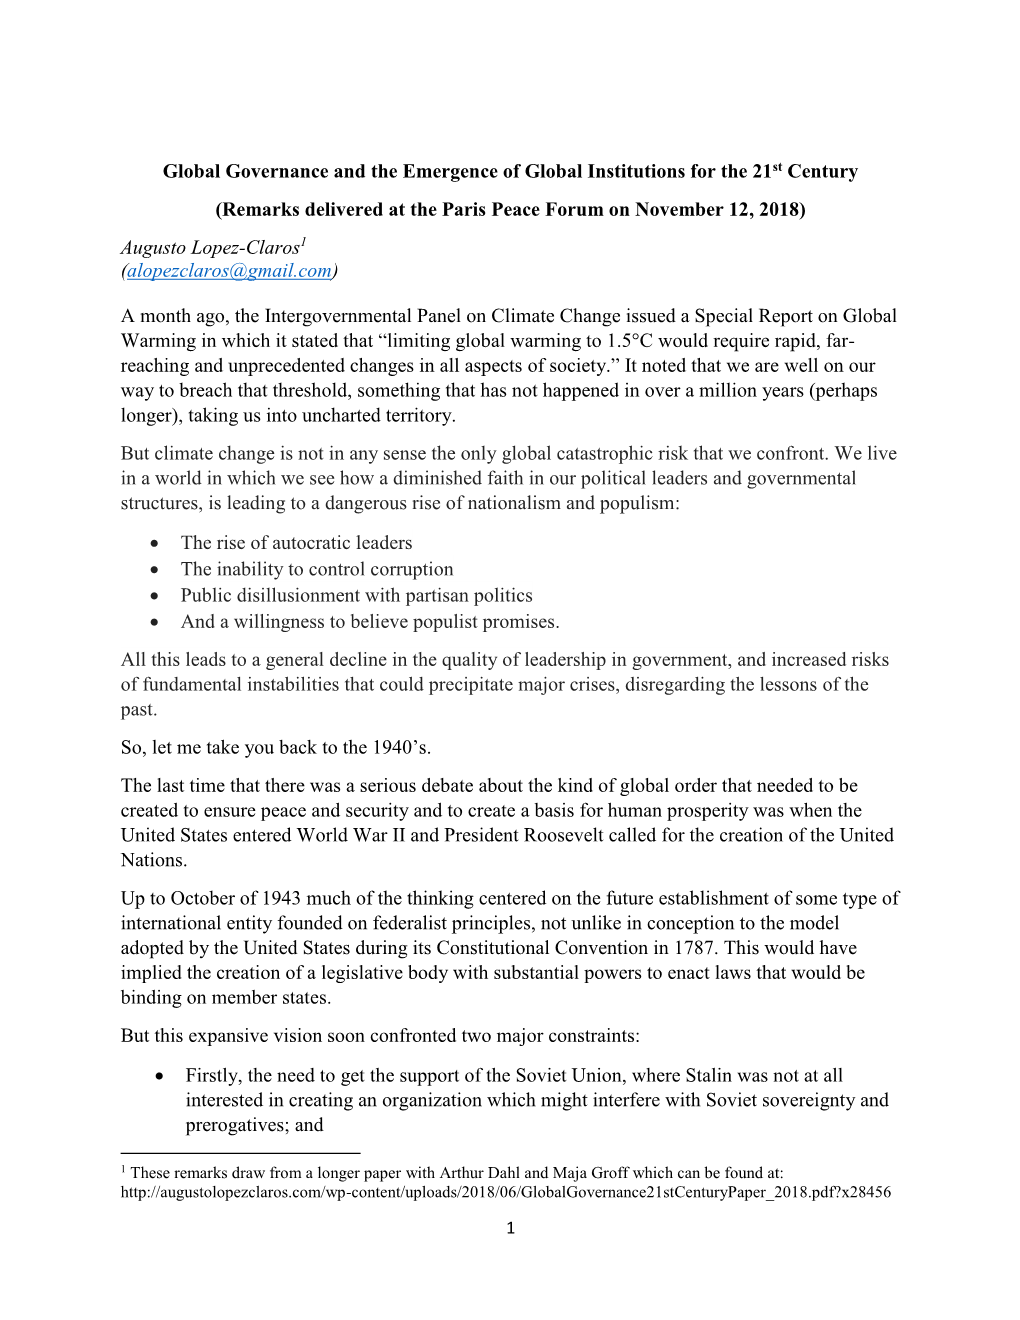 Remarks Delivered at the Paris Peace Forum on November 12, 2018) Augusto Lopez-Claros1 (Alopezclaros@Gmail.Com)